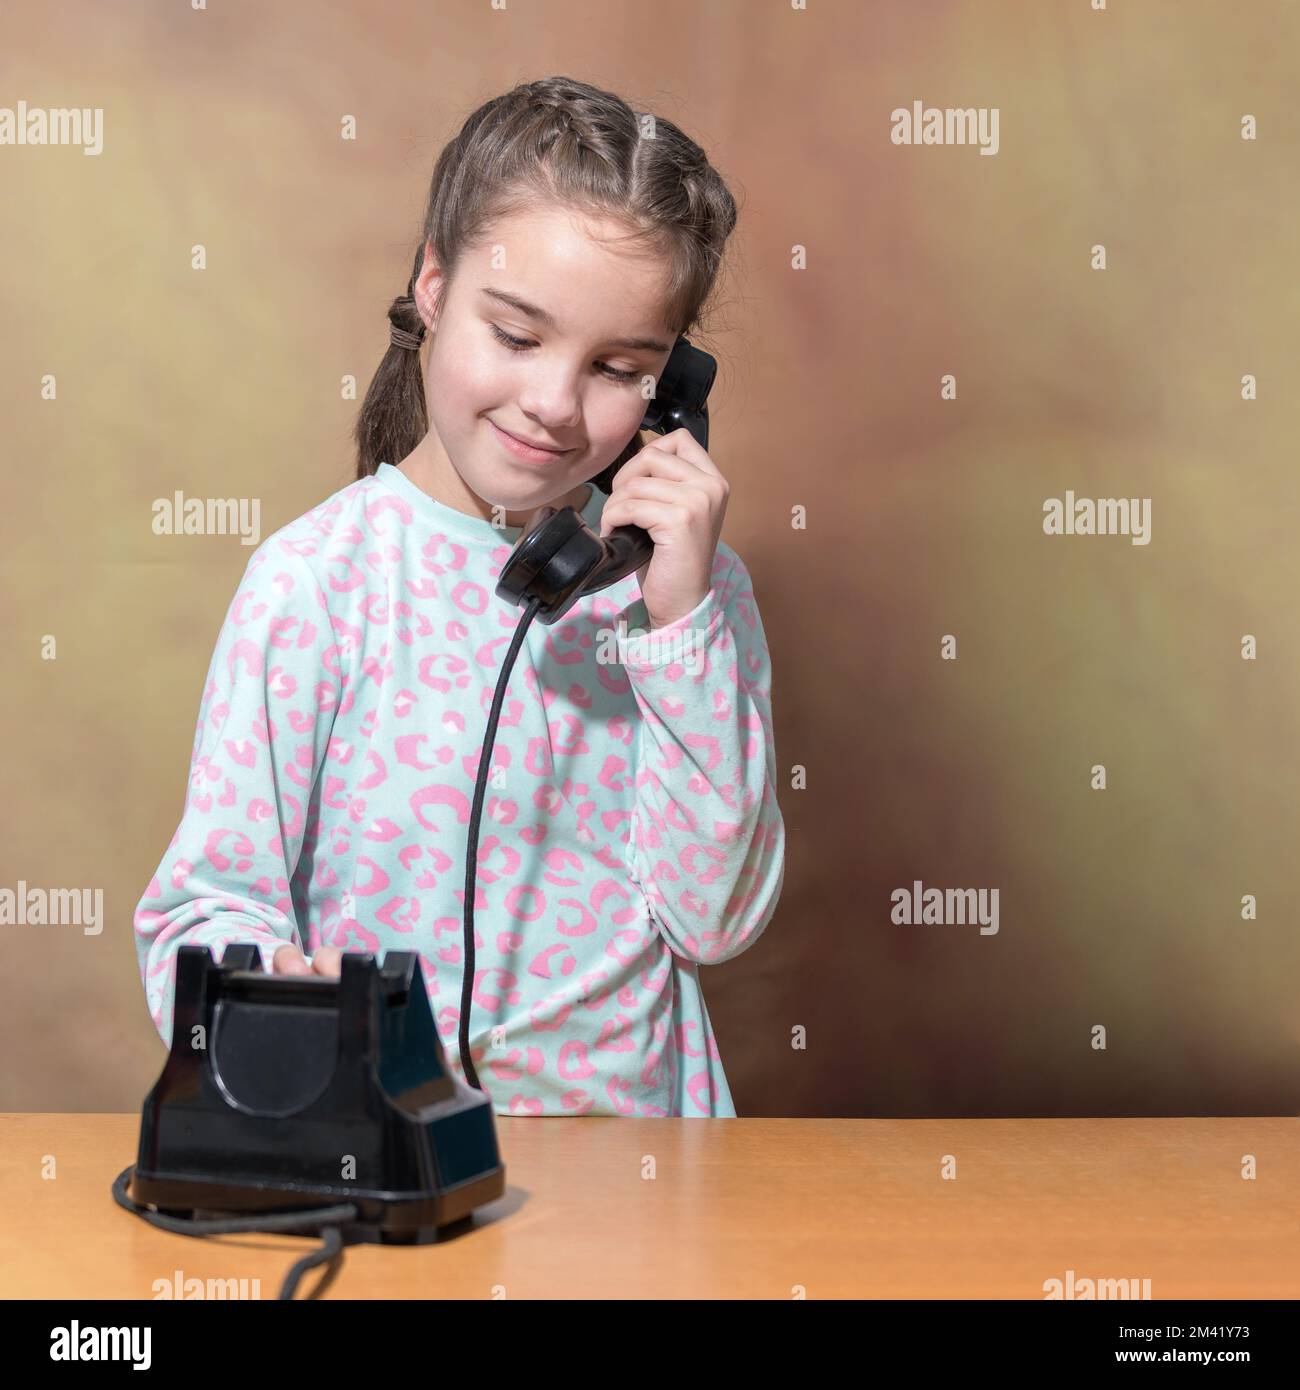 The teenage girl dials a number on an old telephone. Retro Portrait of a girl. Square format Stock Photo